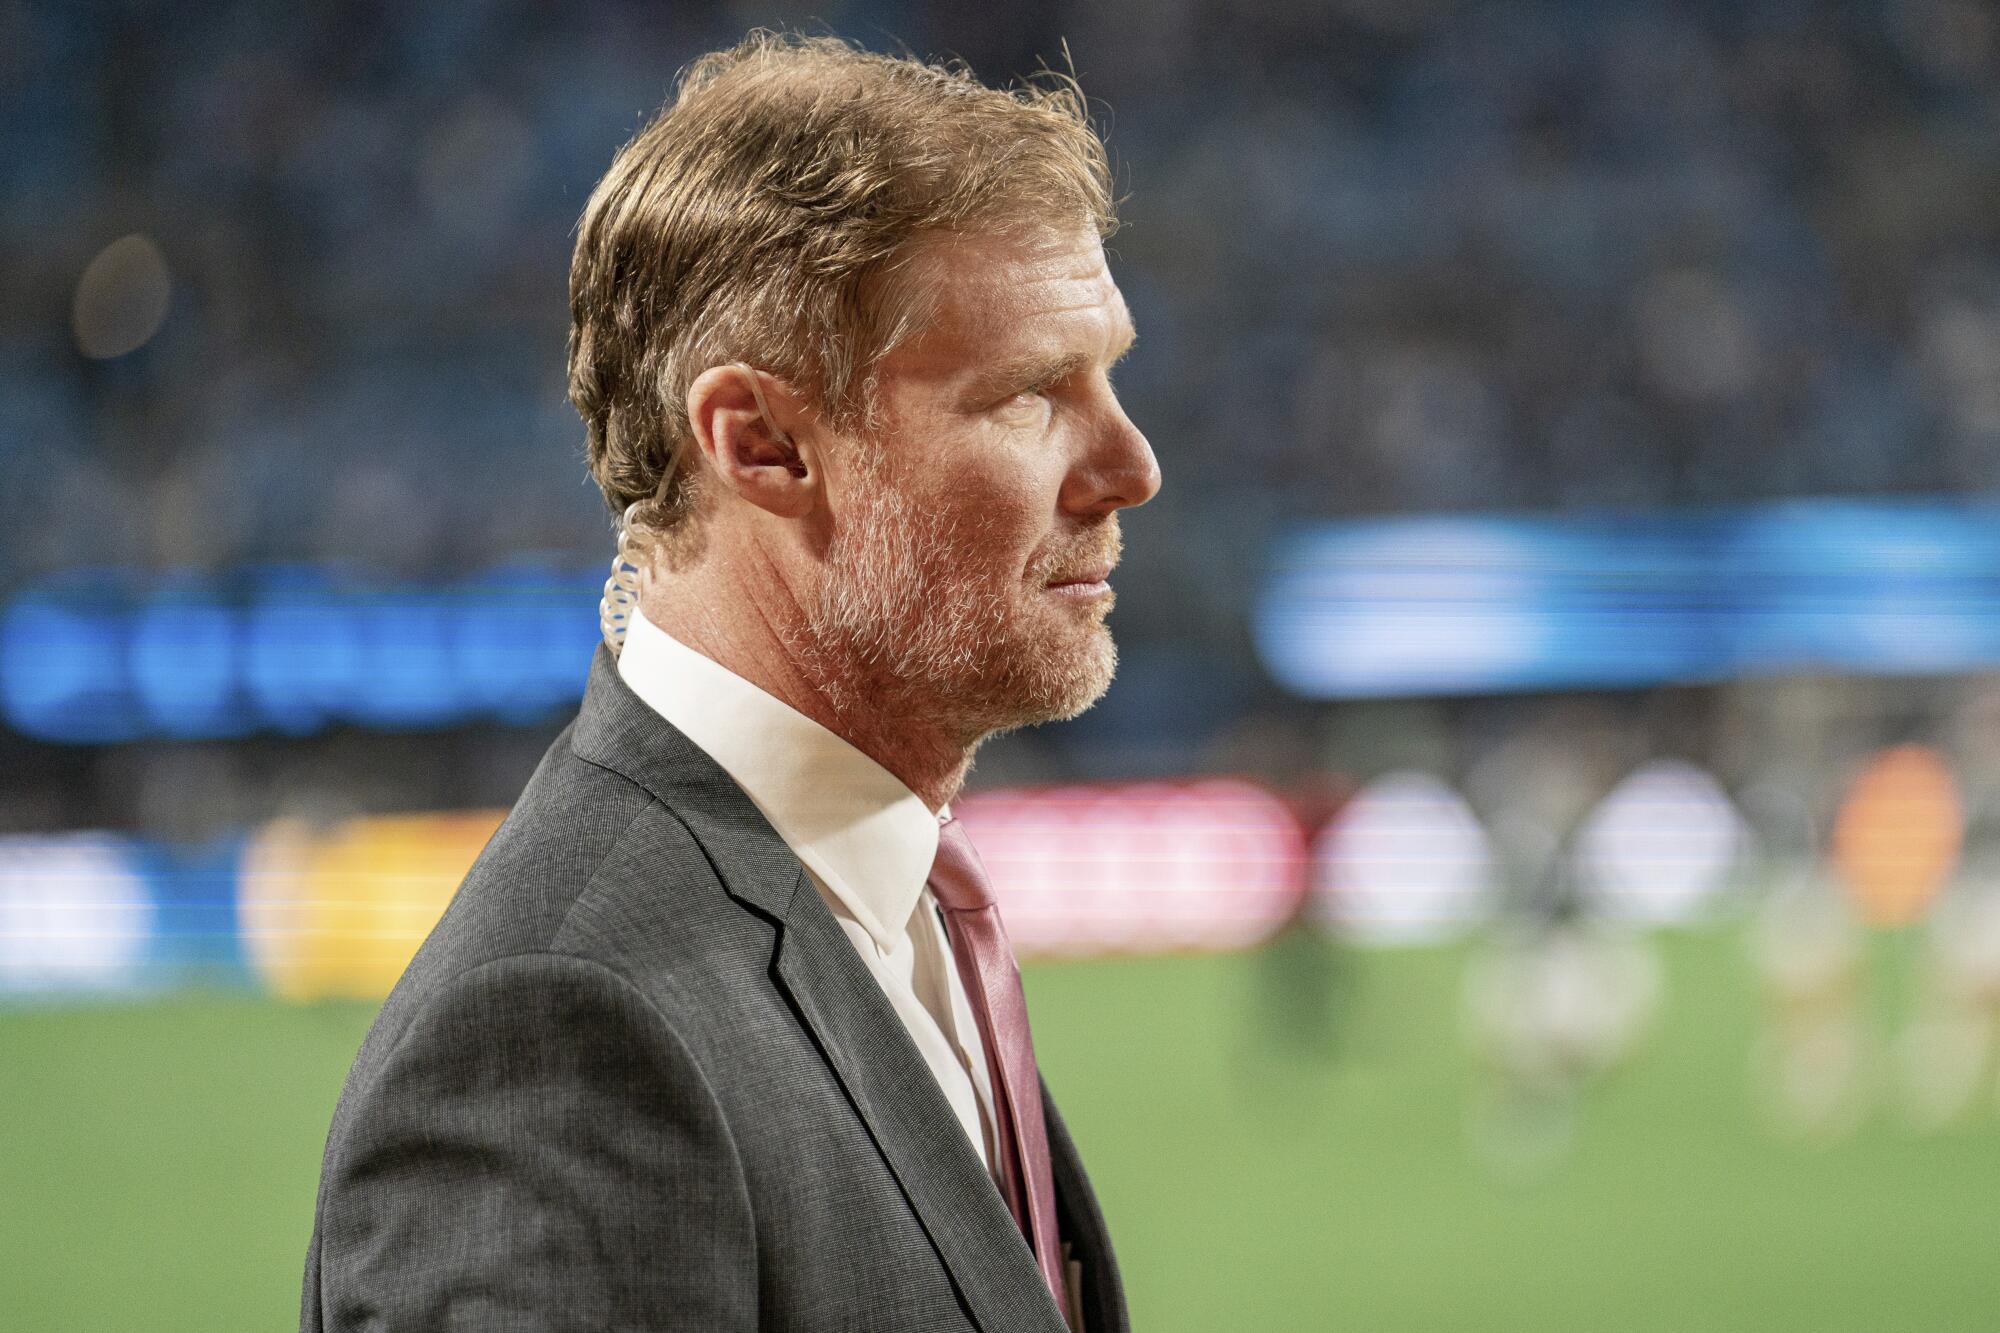 Alexi Lalas looks on before an MLS match between host Charlotte FC and the Galaxy on March 5, 2022.